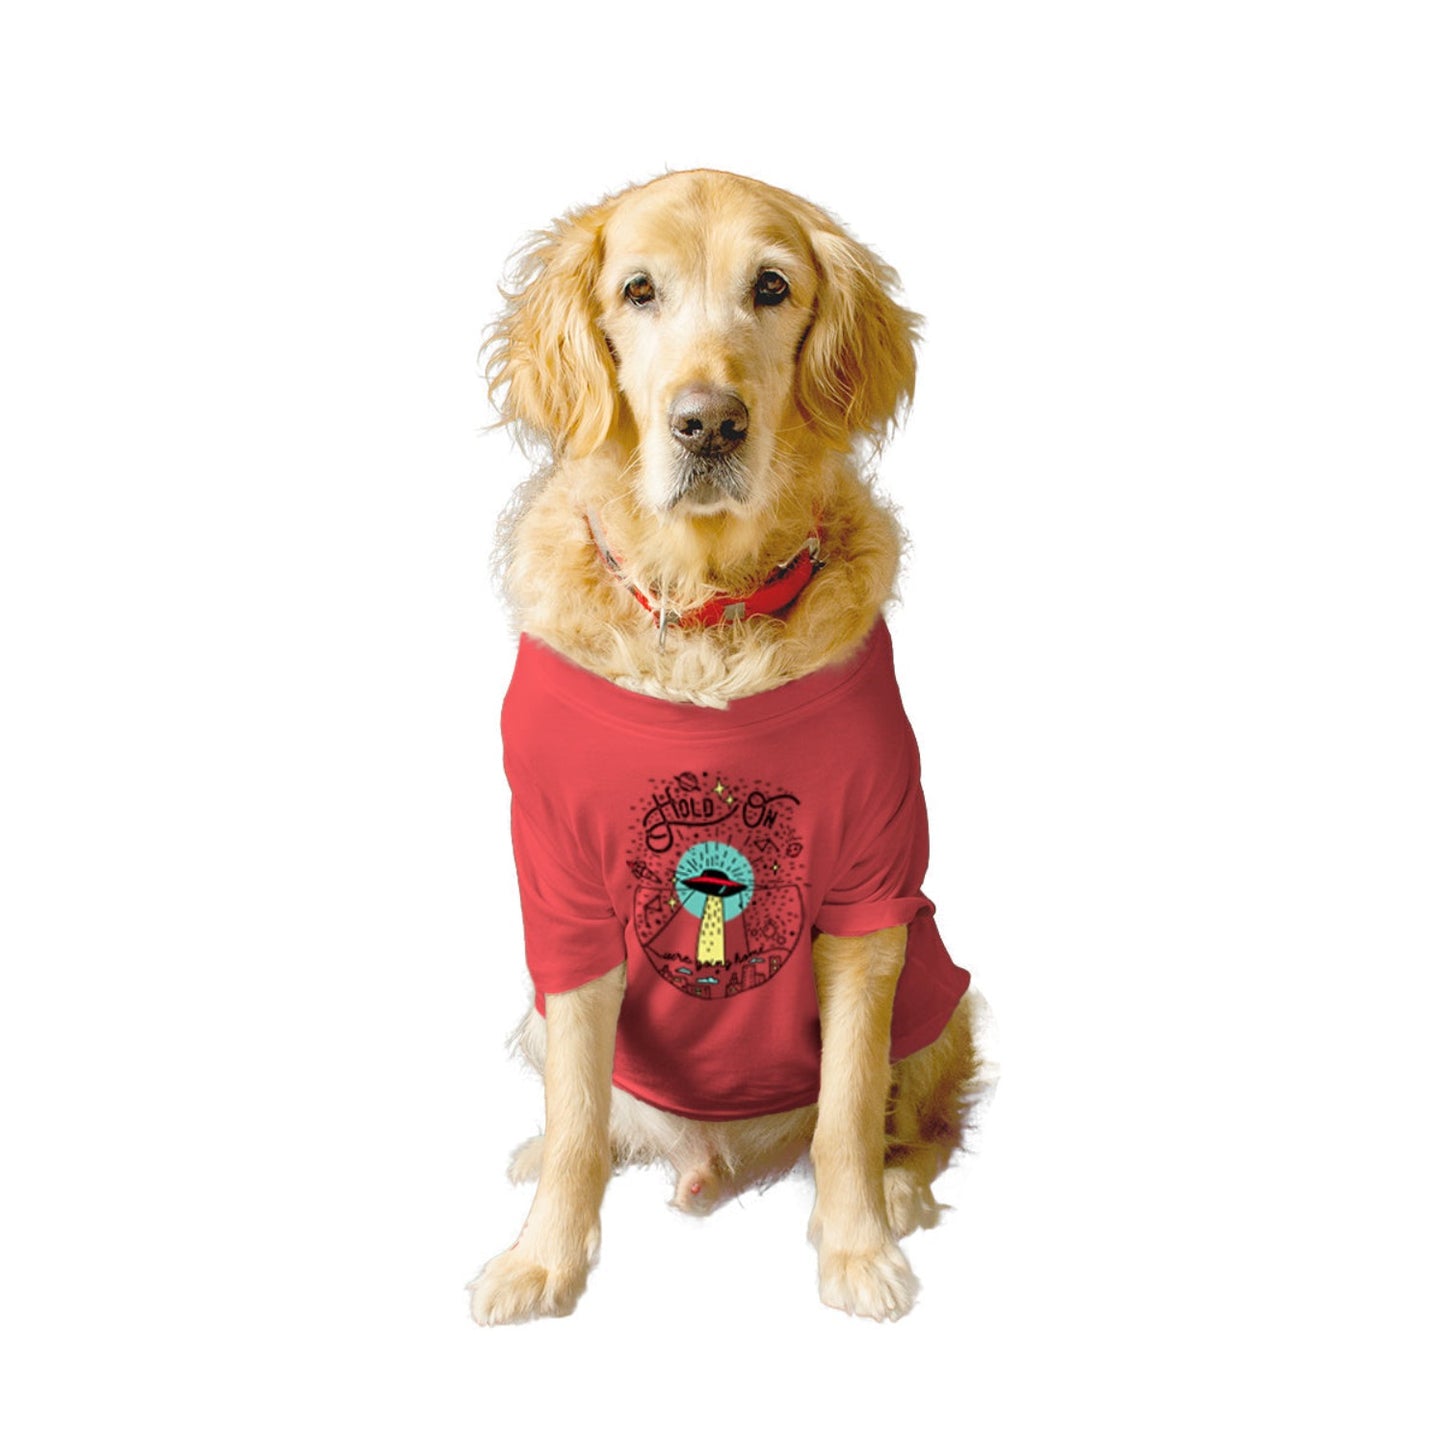 Ruse XX-Small (Chihuahuas, Papillons) / Poppy Red Ruse Basic Crew Neck "Hold on U.F.O." Printed Half Sleeves Dog Tee